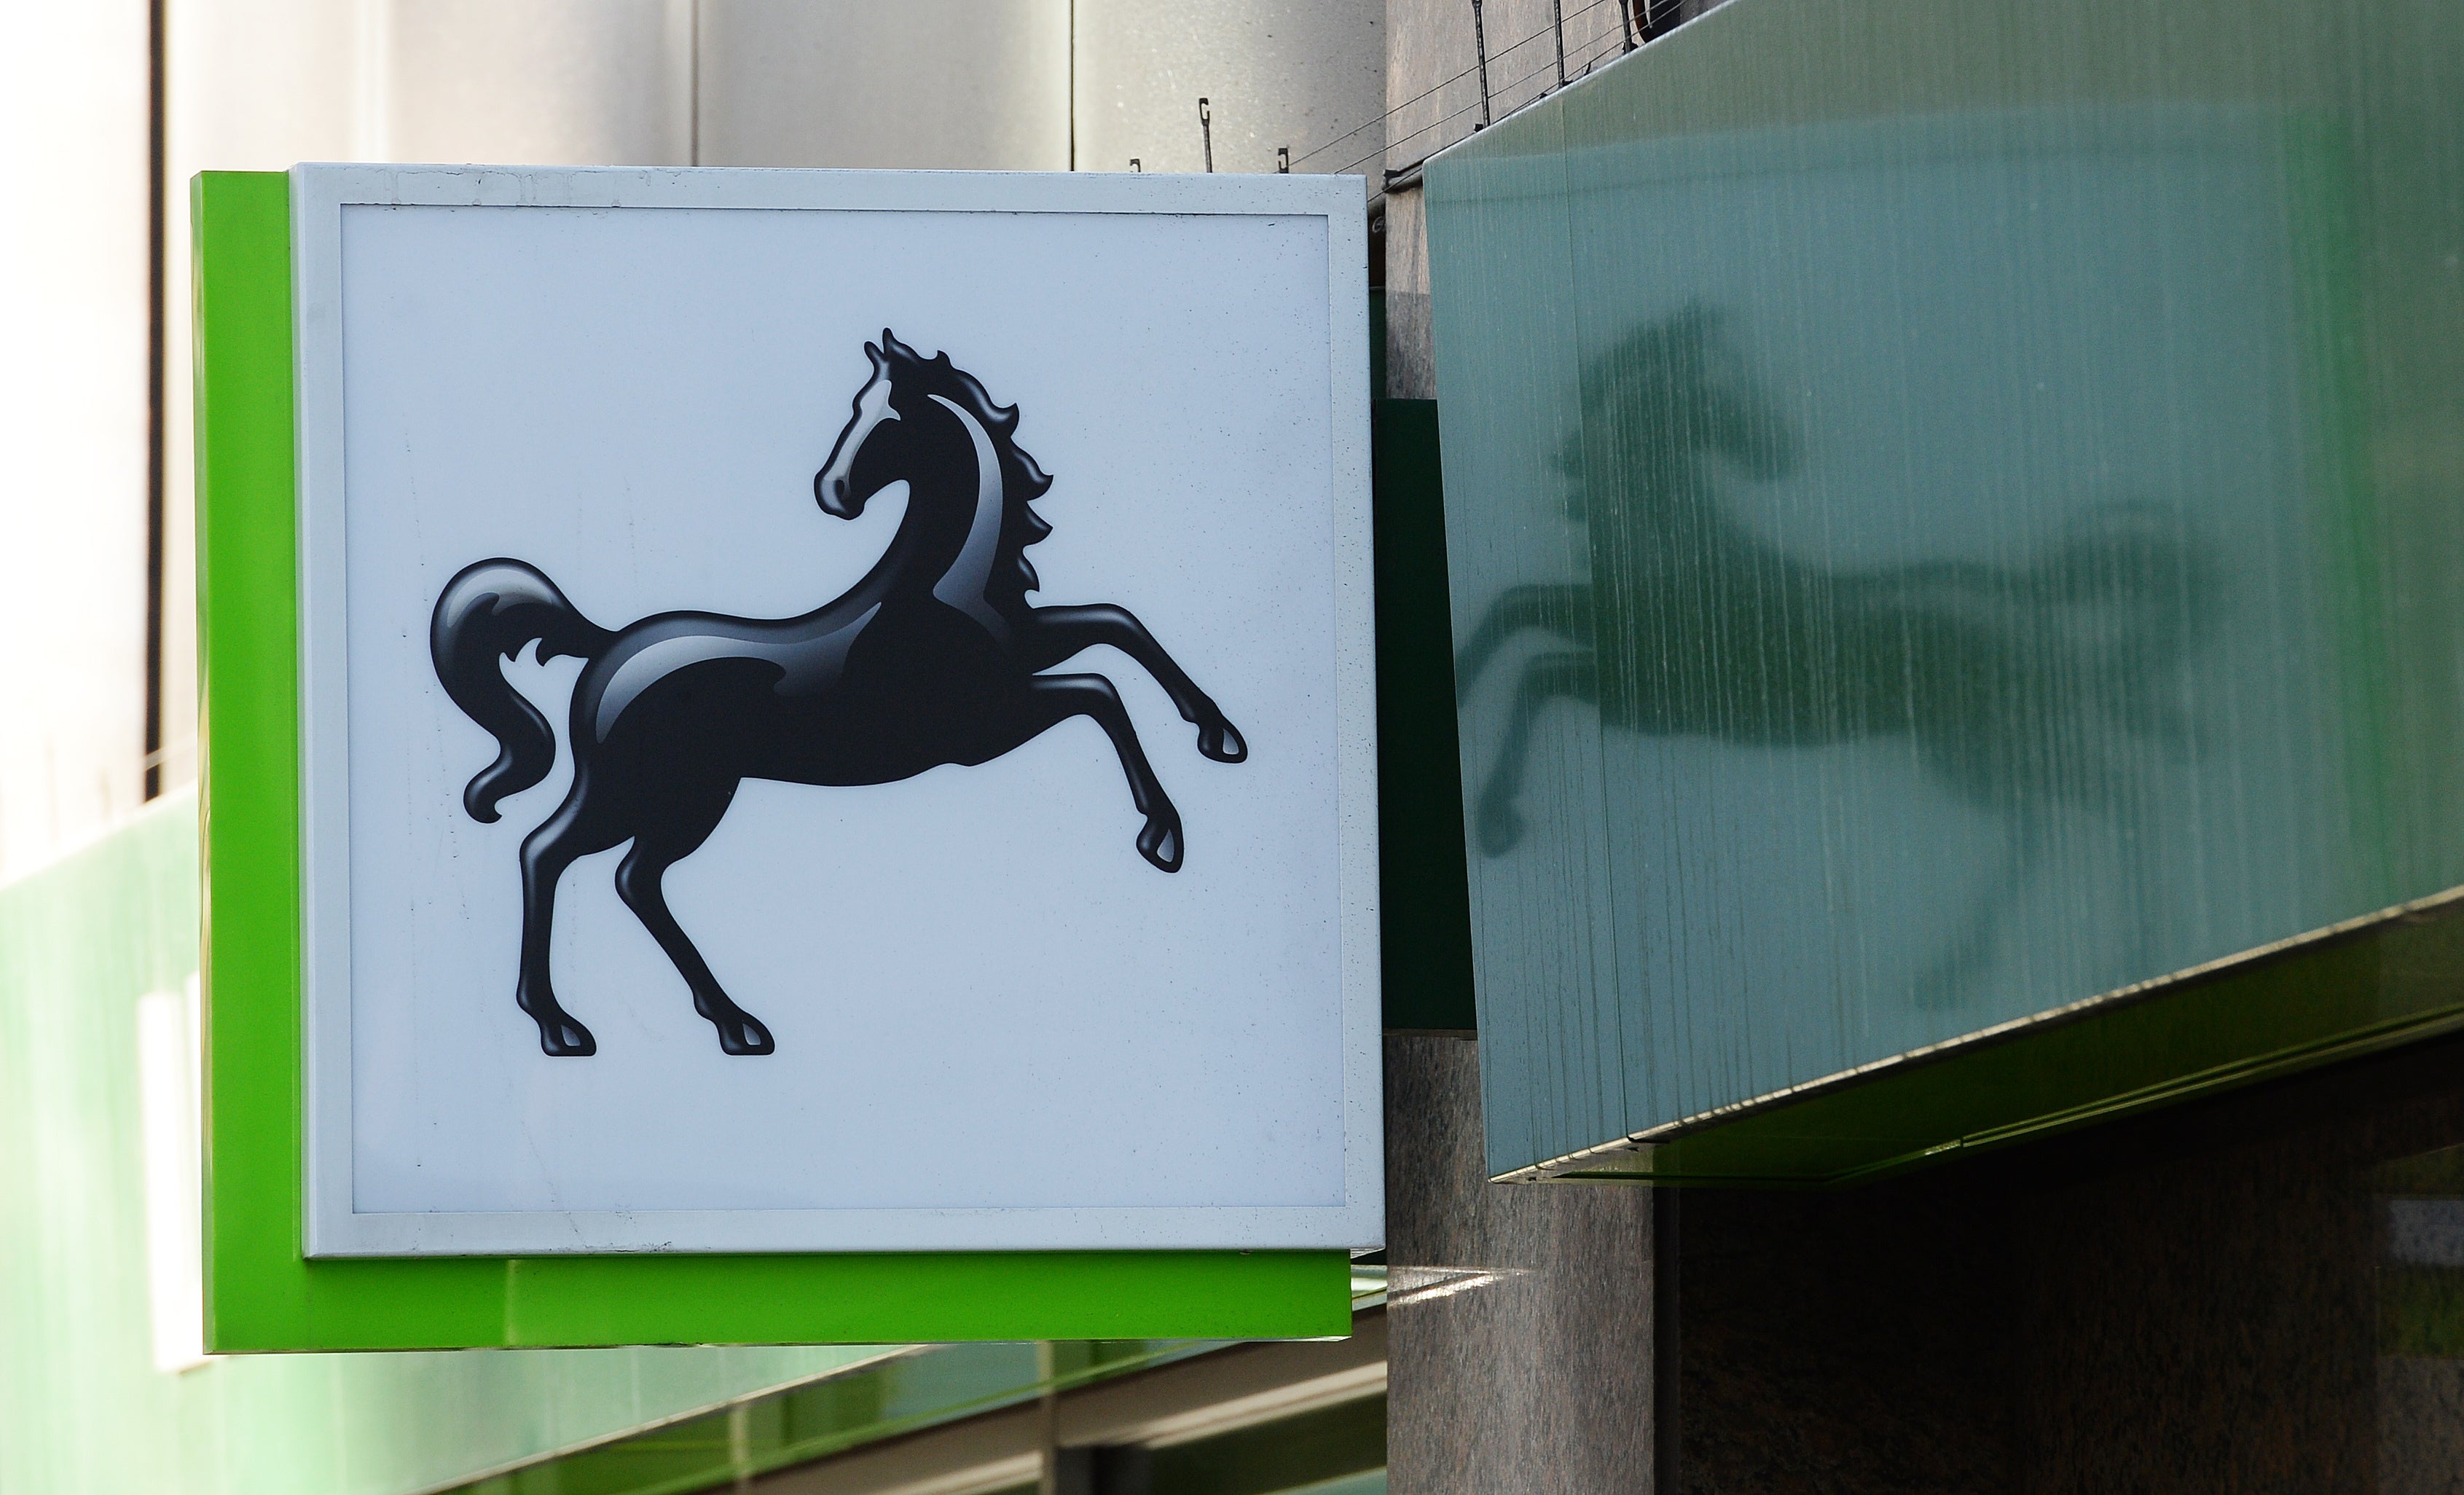 Lloyds Banking Group is worried about economic uncertainty